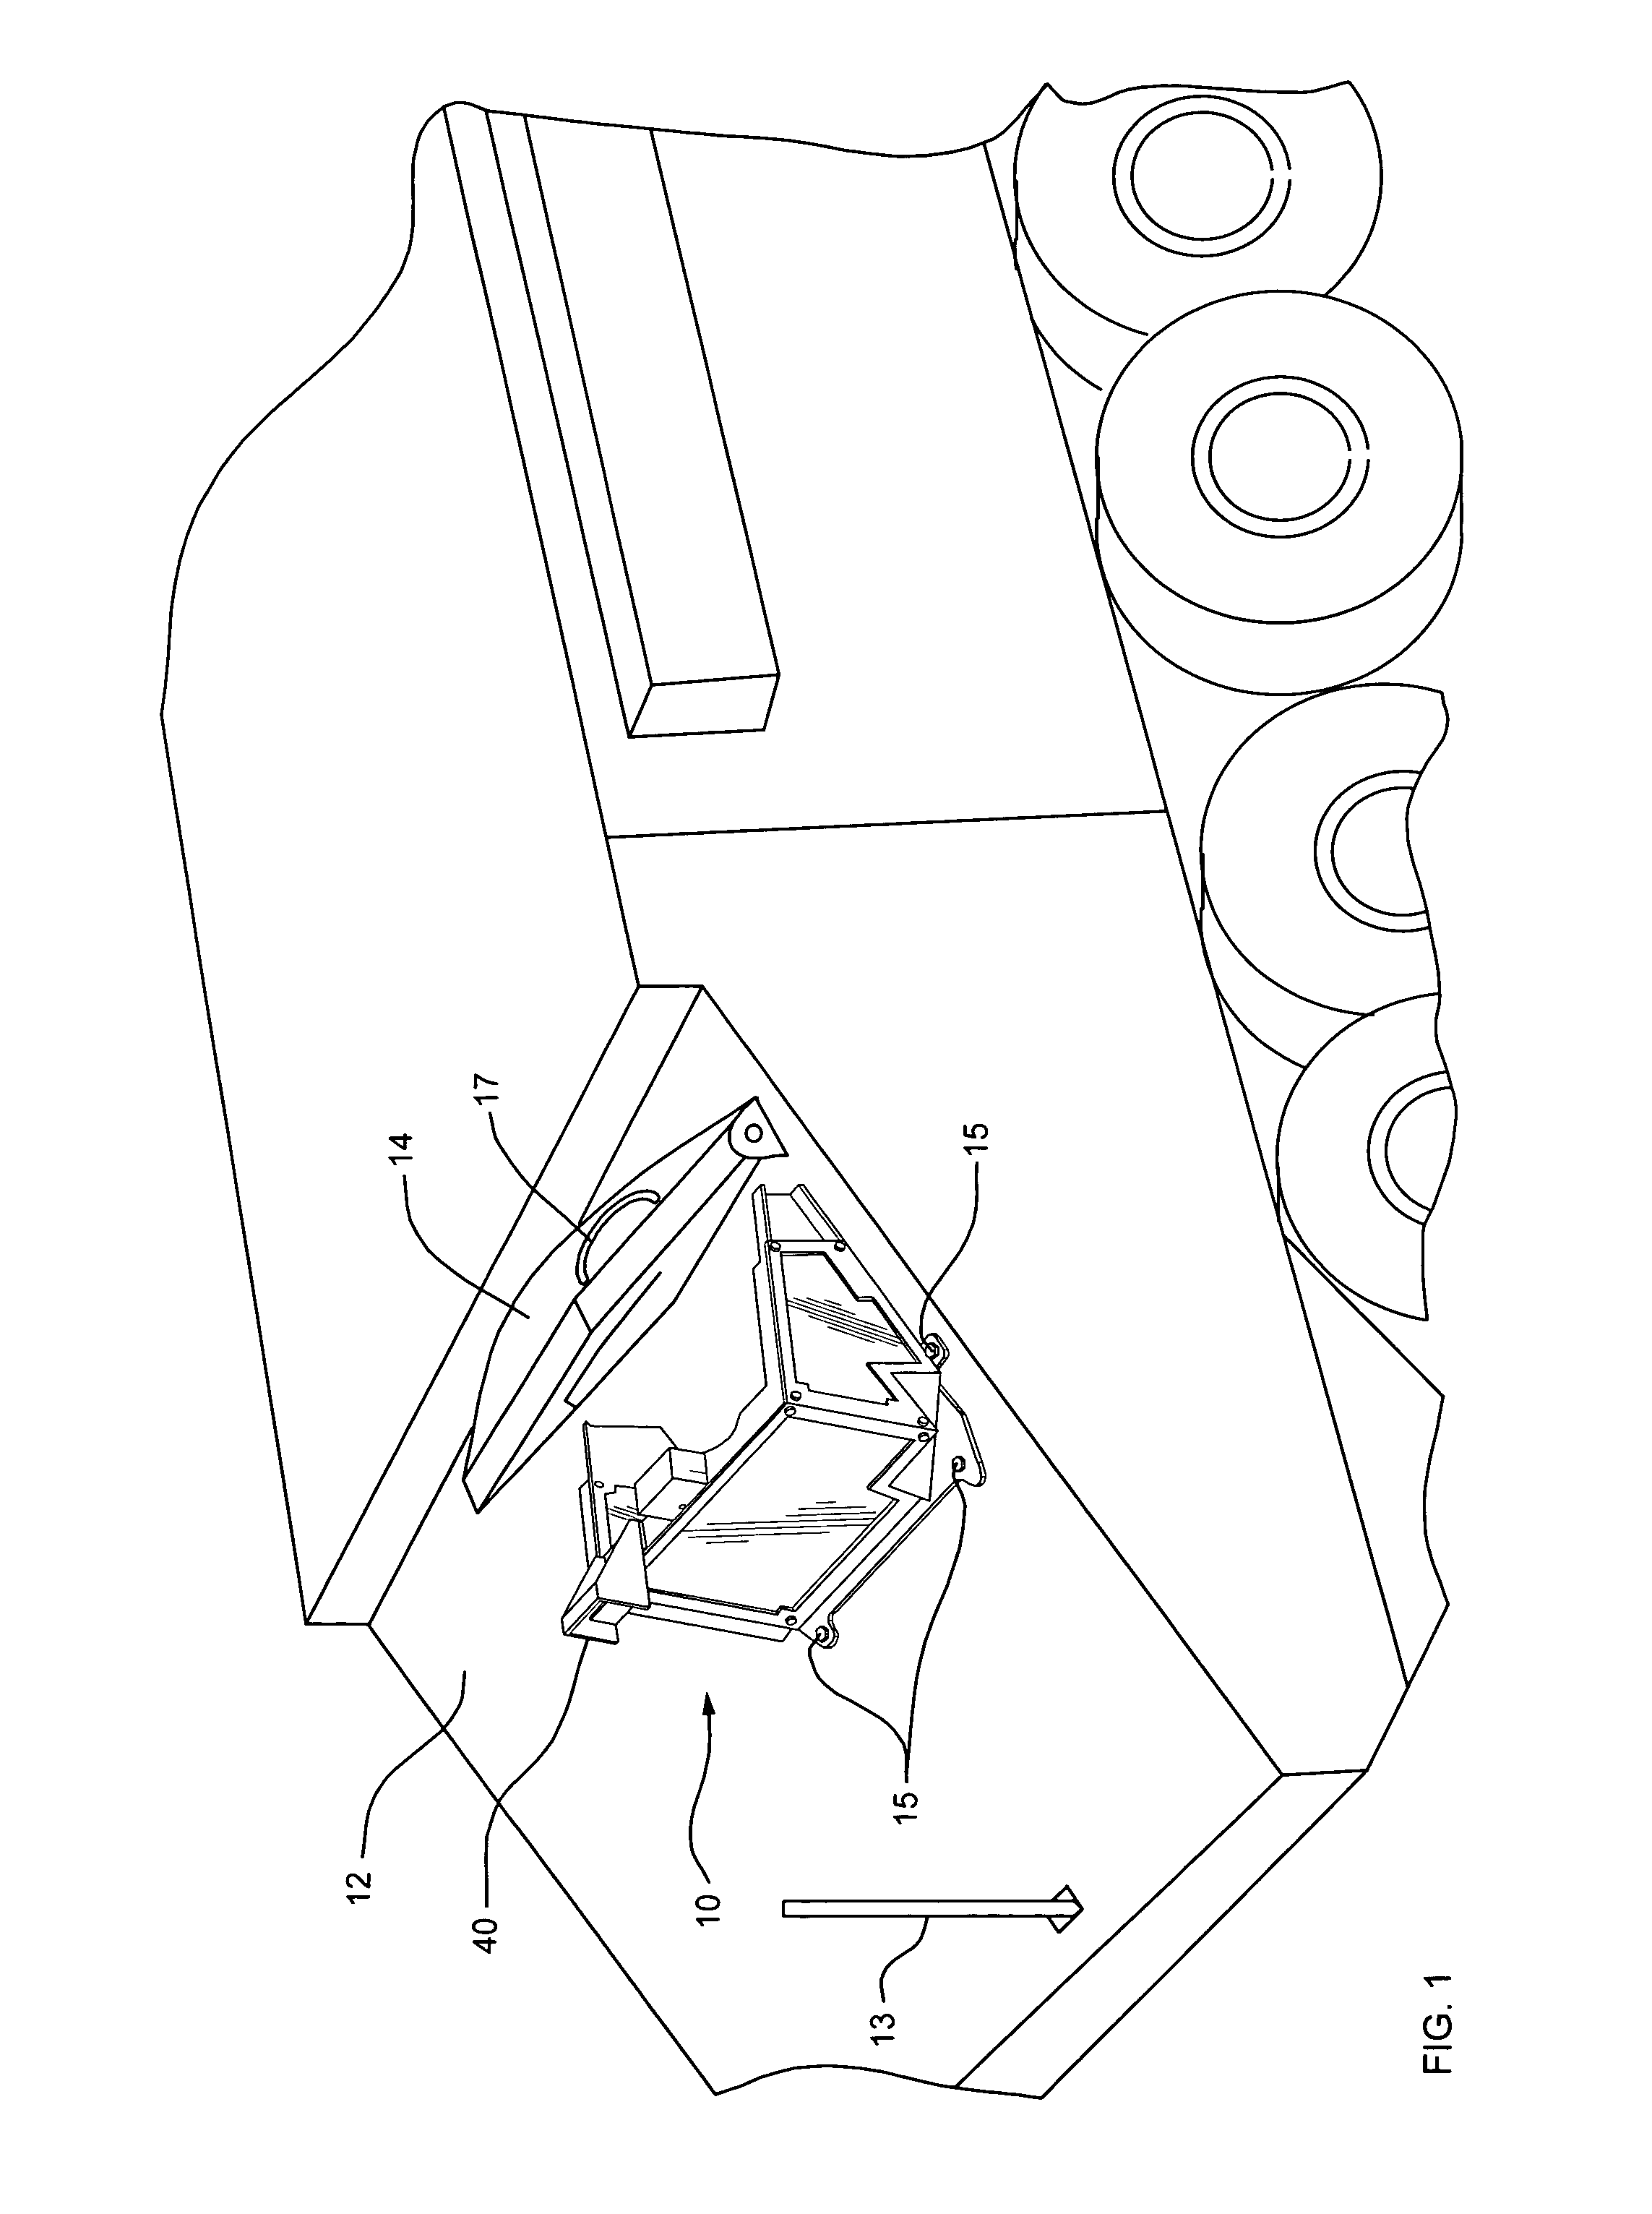 Ballistic armor shield for hatch area of armored vehicle